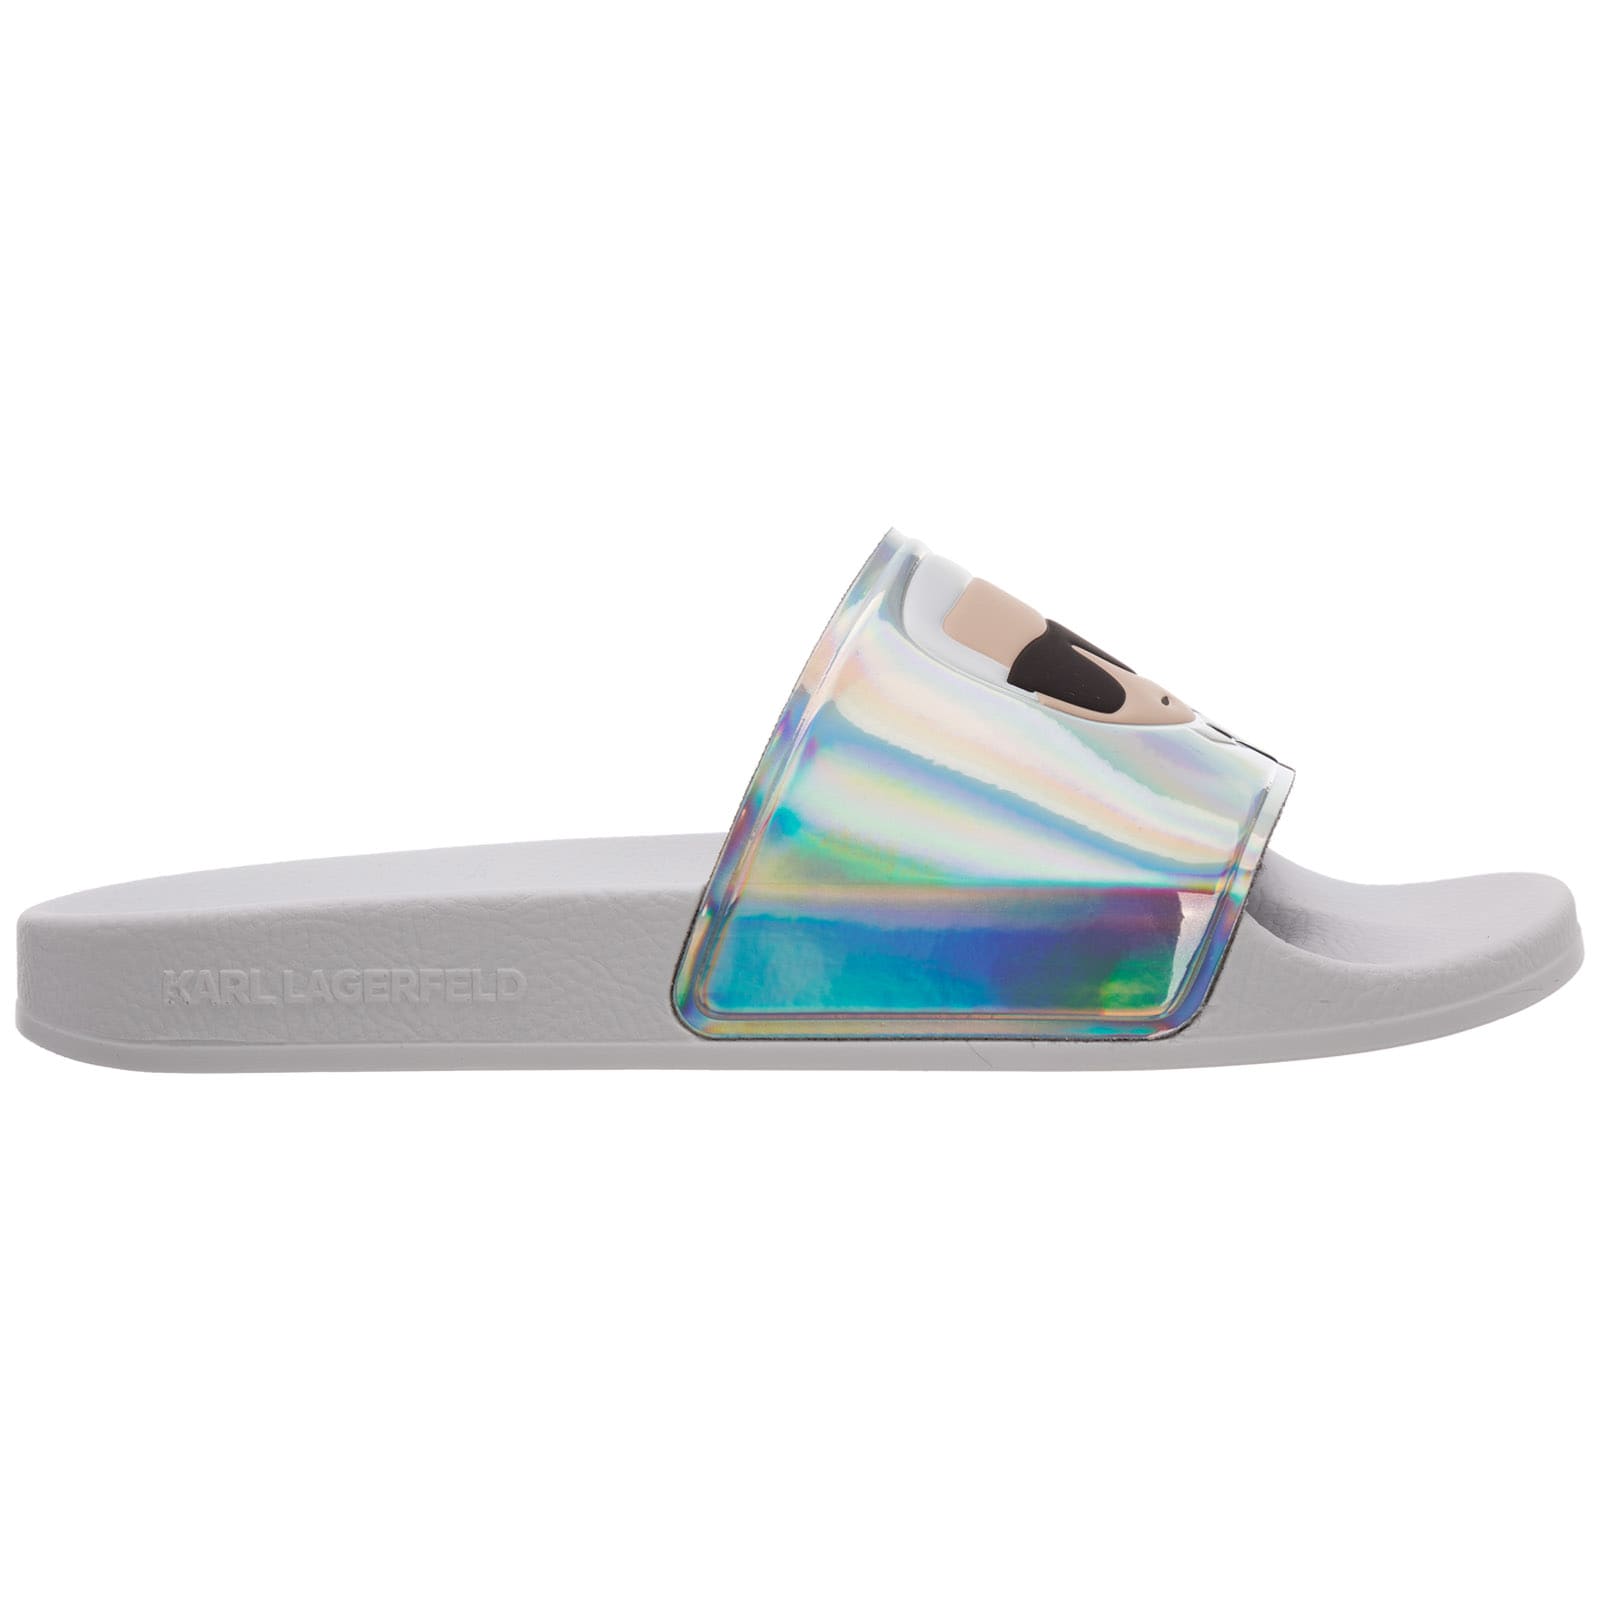 Buy Karl Lagerfeld Ikonik Slides online, shop Karl Lagerfeld shoes with free shipping